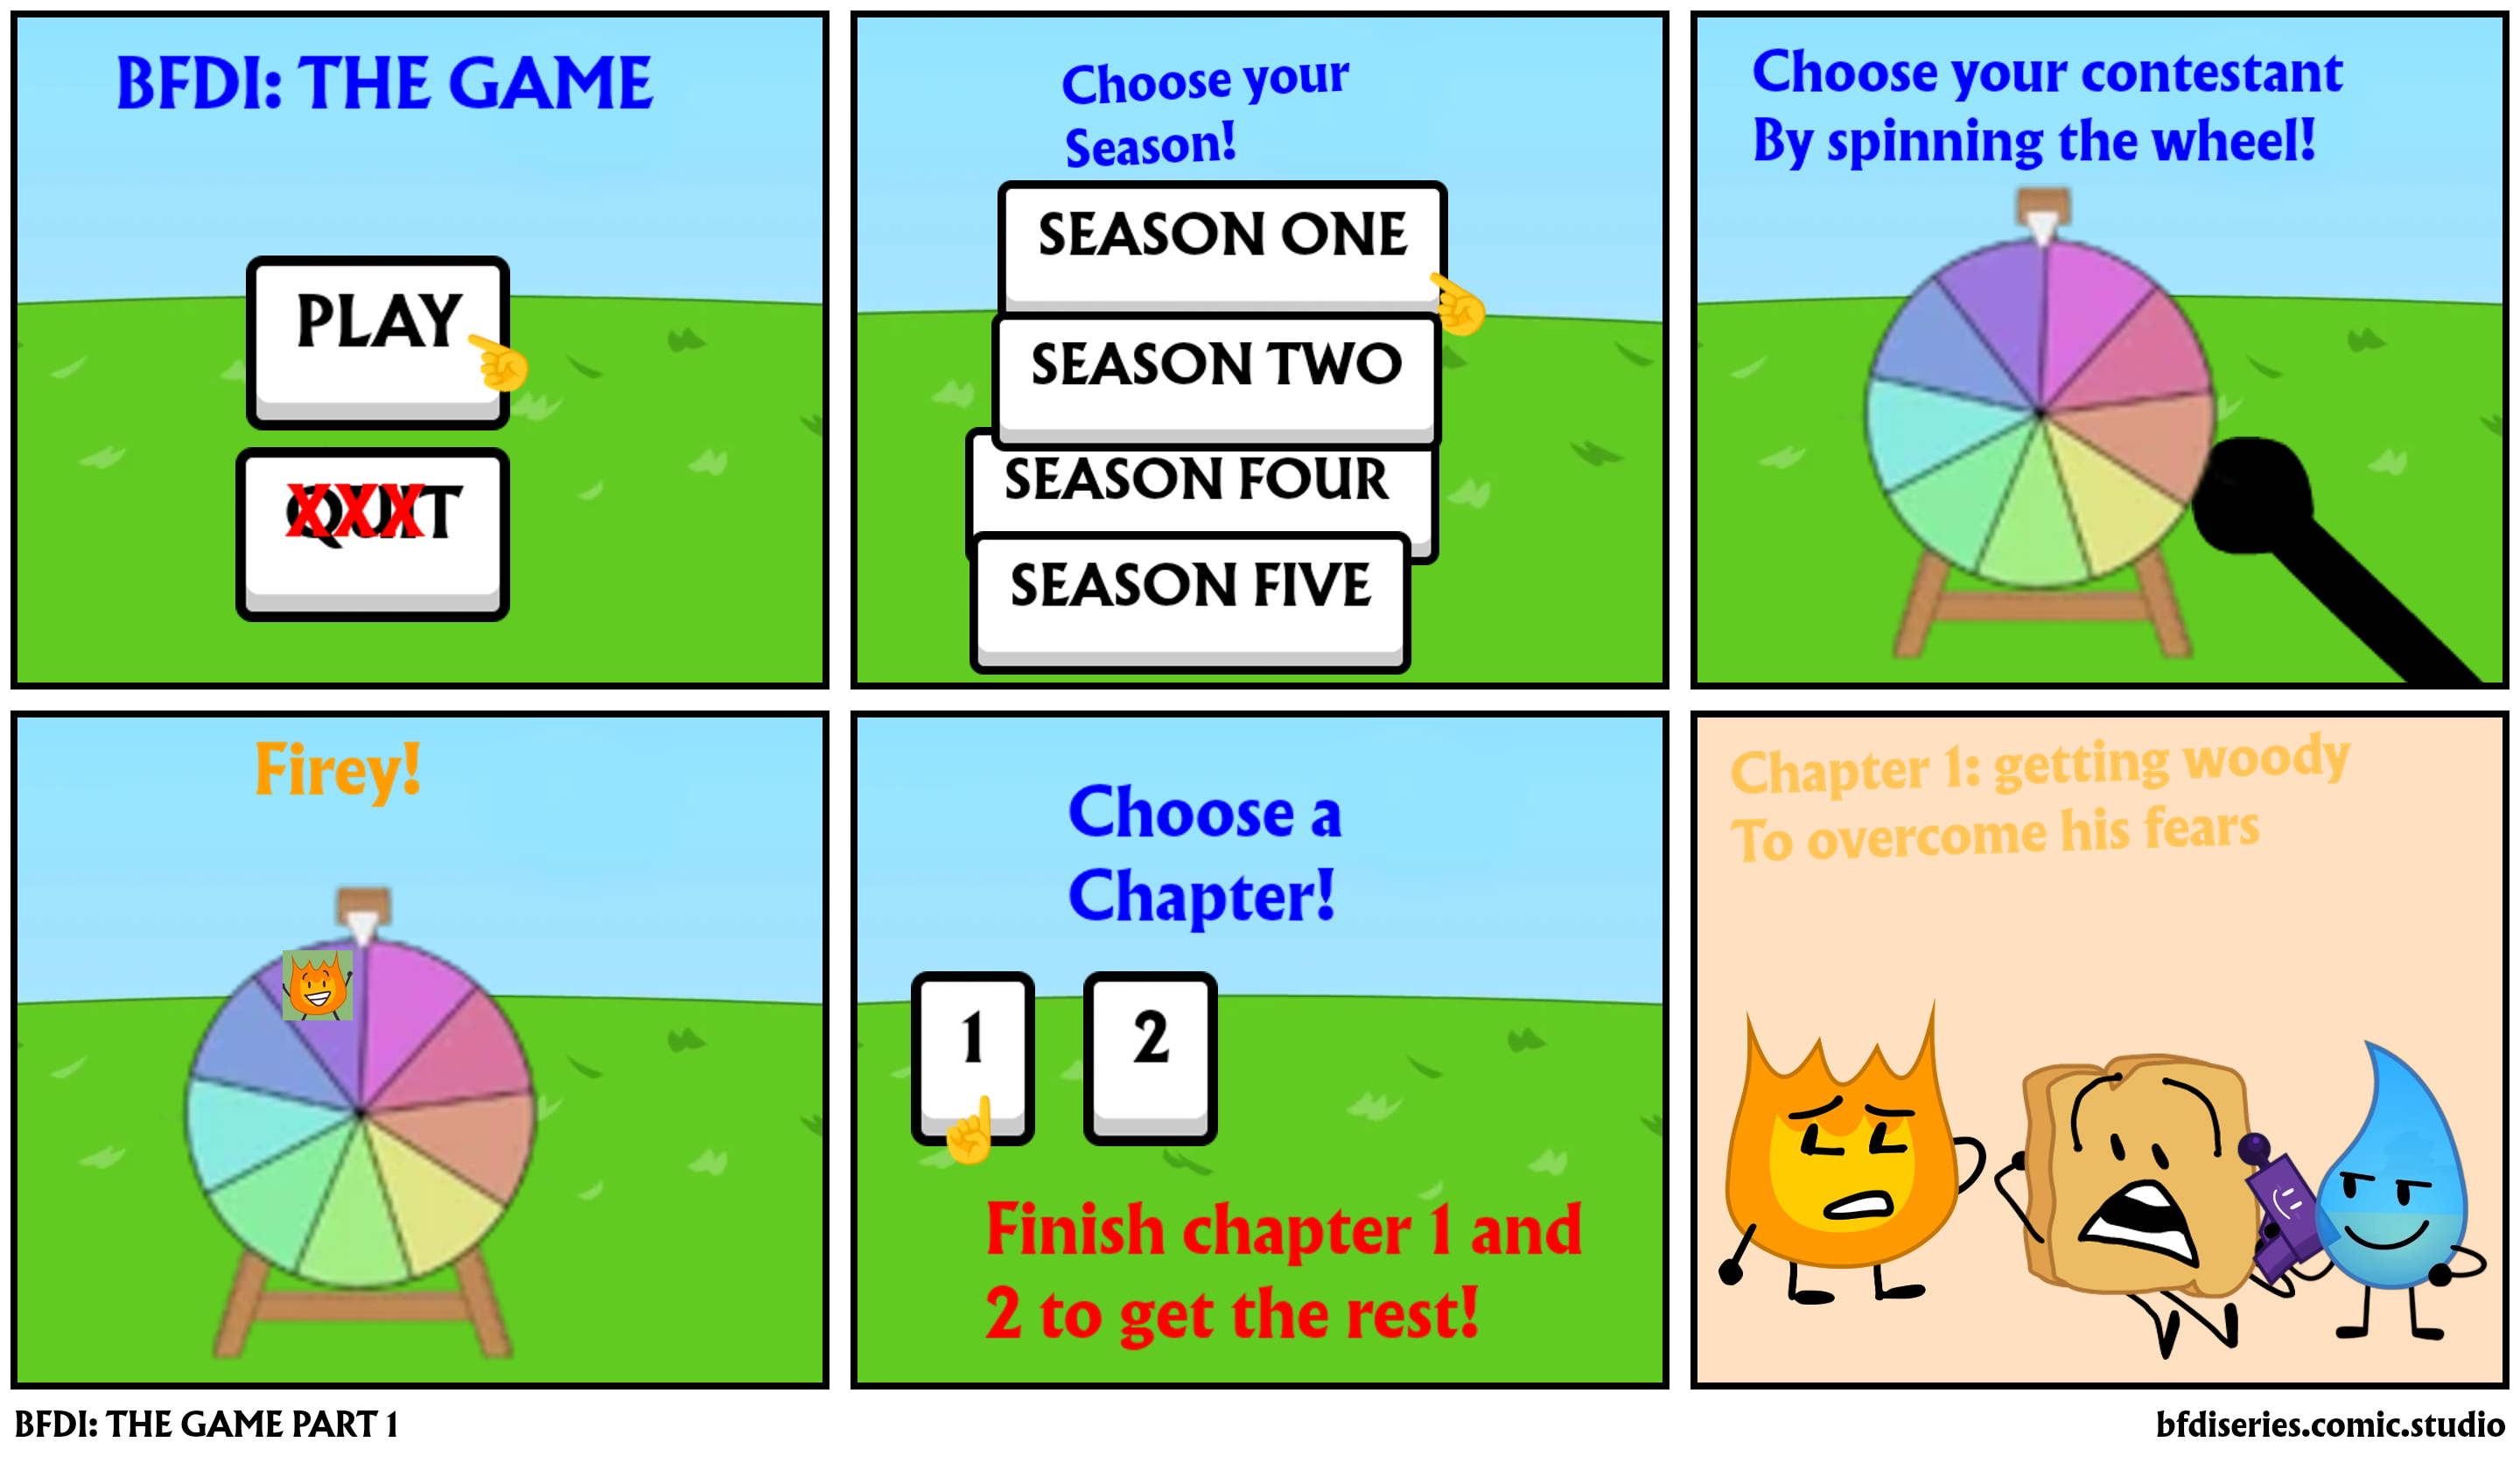 BFDI: THE GAME PART 1